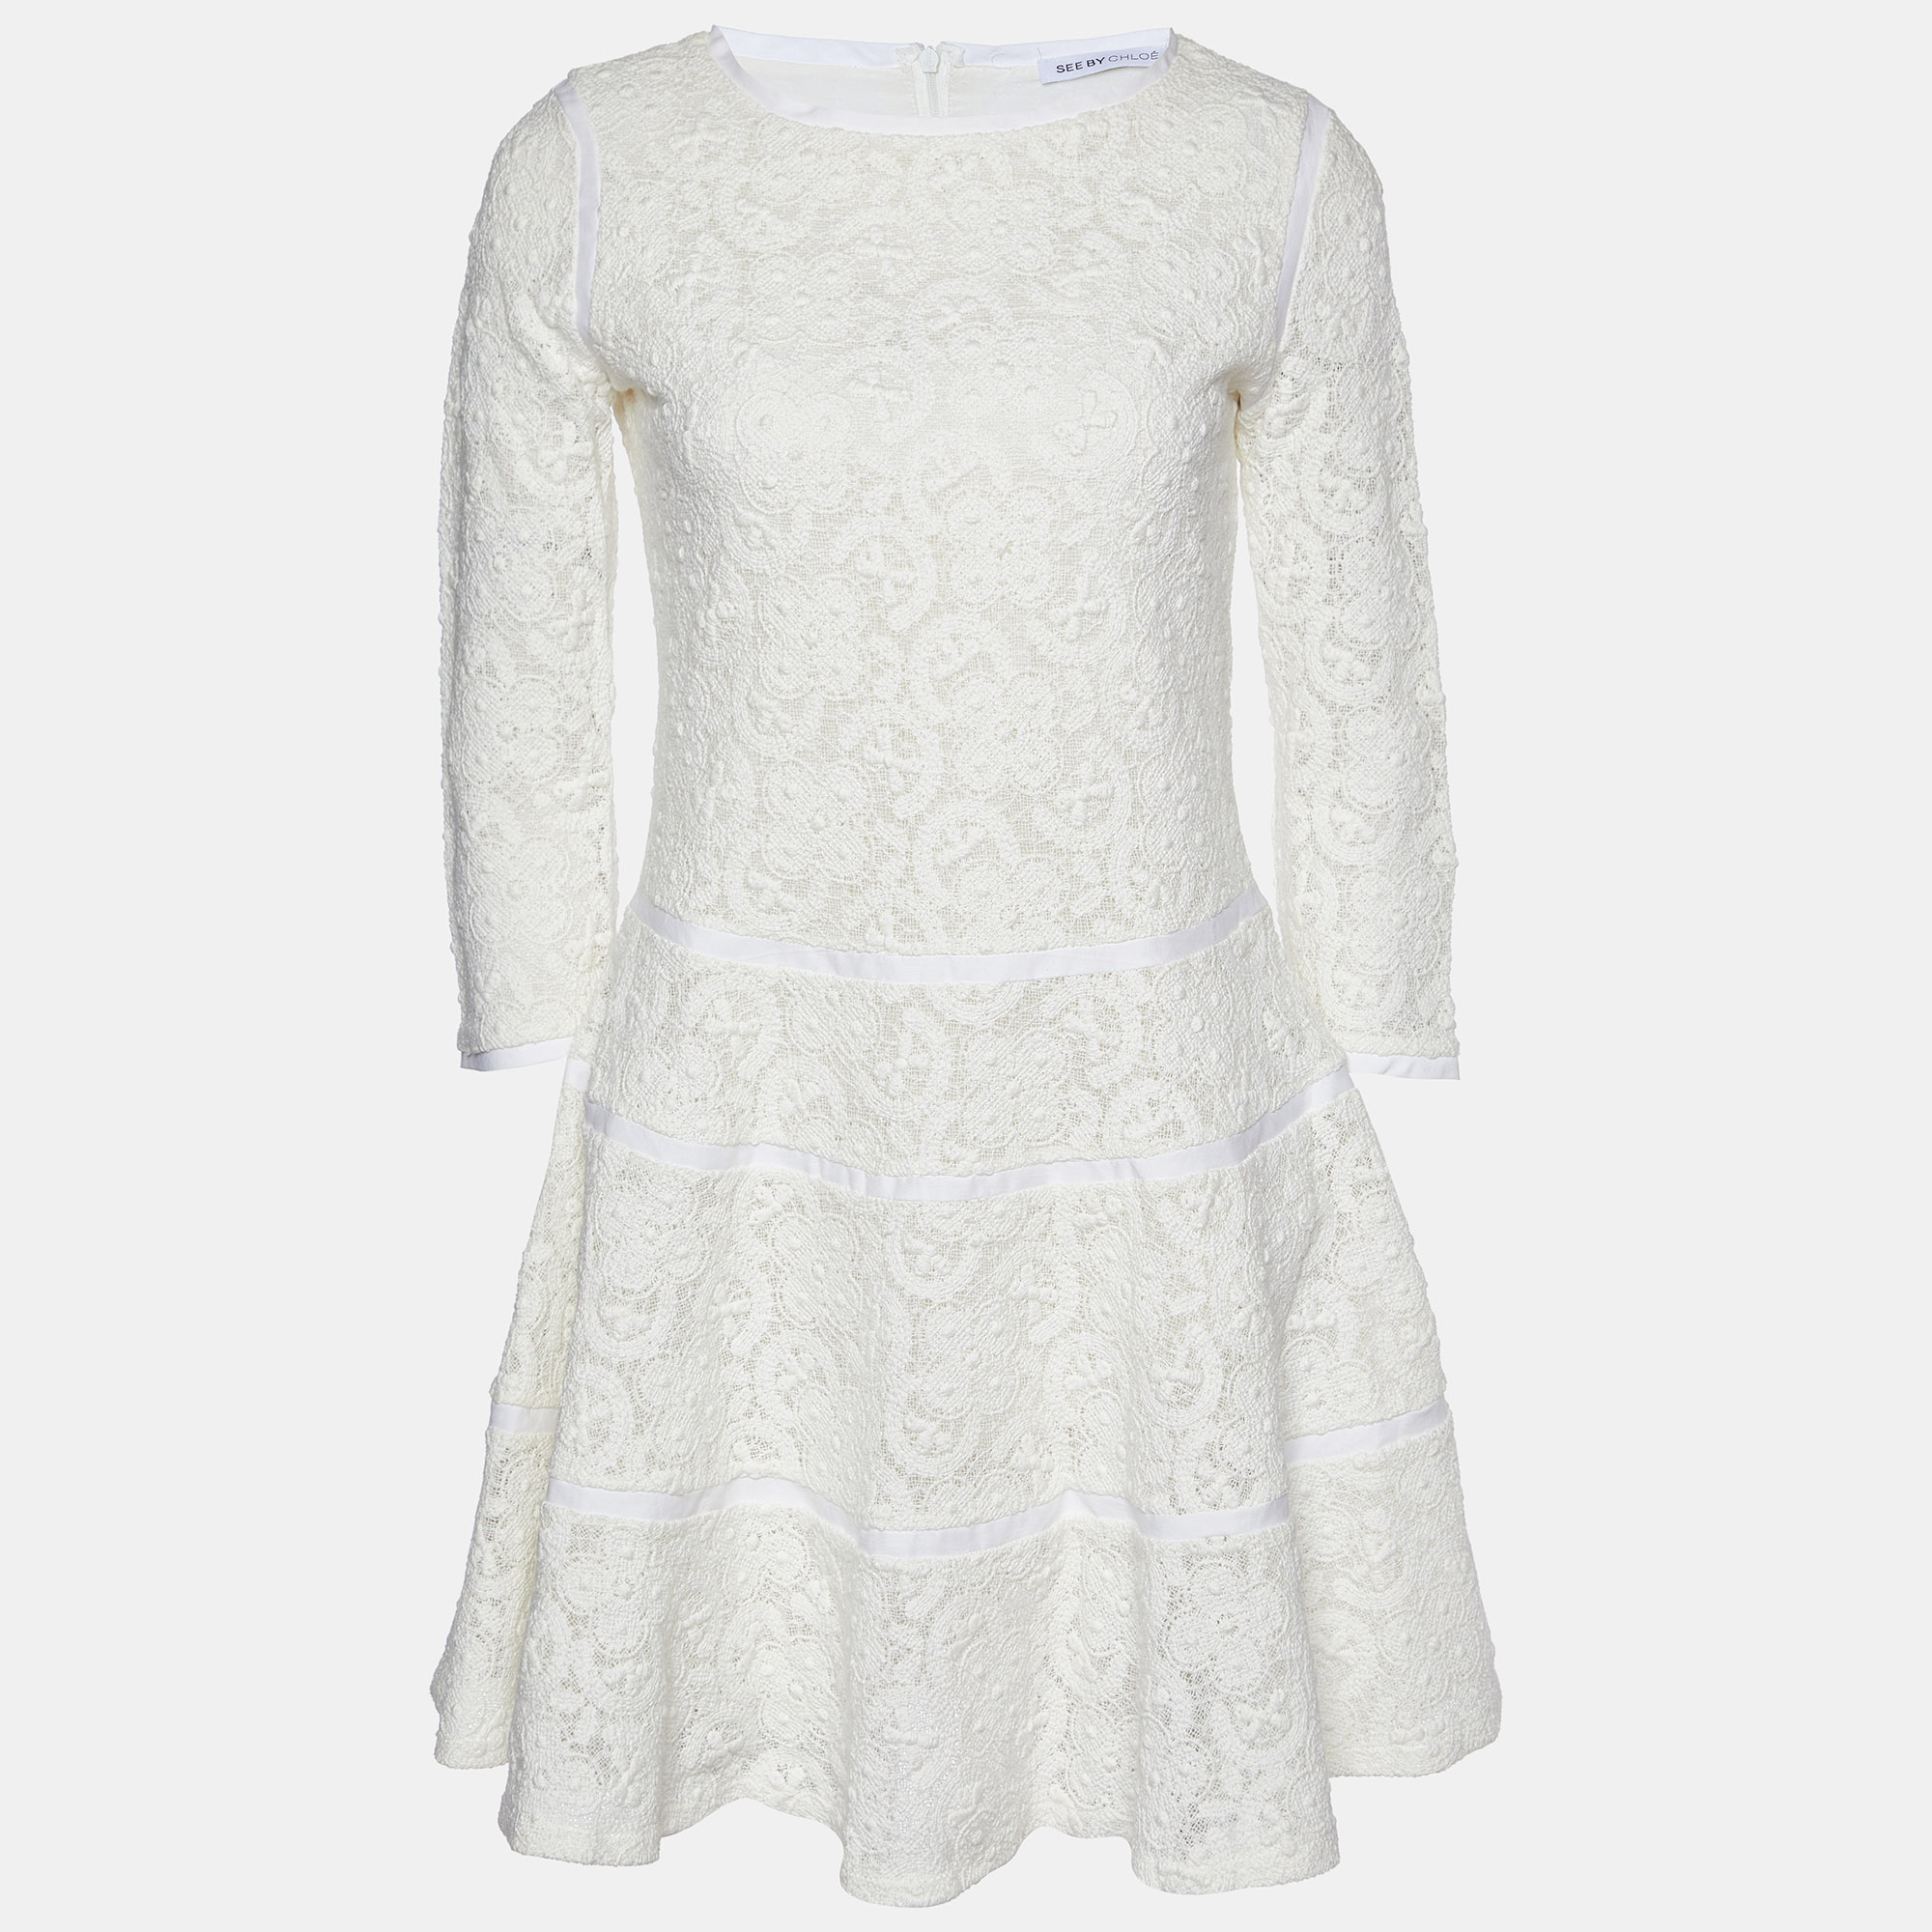 See by chloe white crochet lace fit & flare dress s